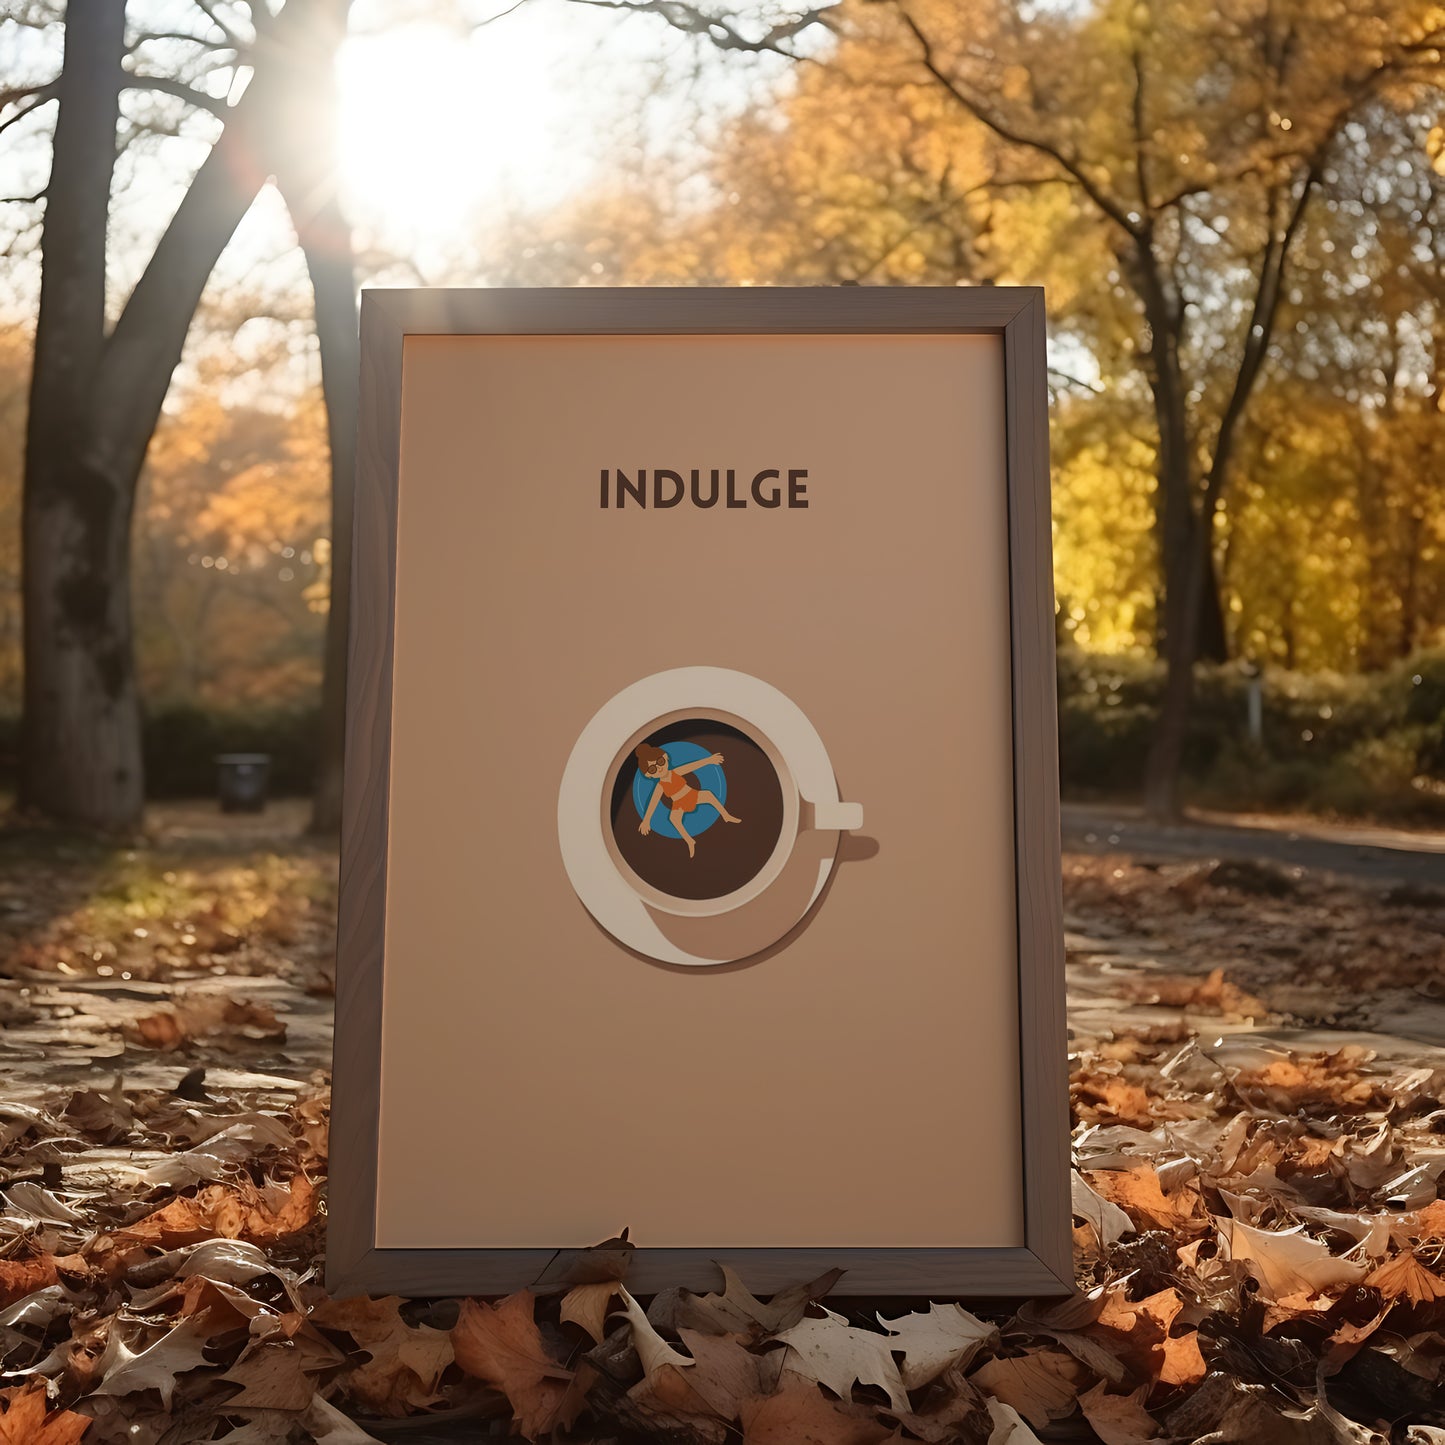 A framed poster reading "INDULGE" with a graphic of a coffee cup and autumn leaves in the background.